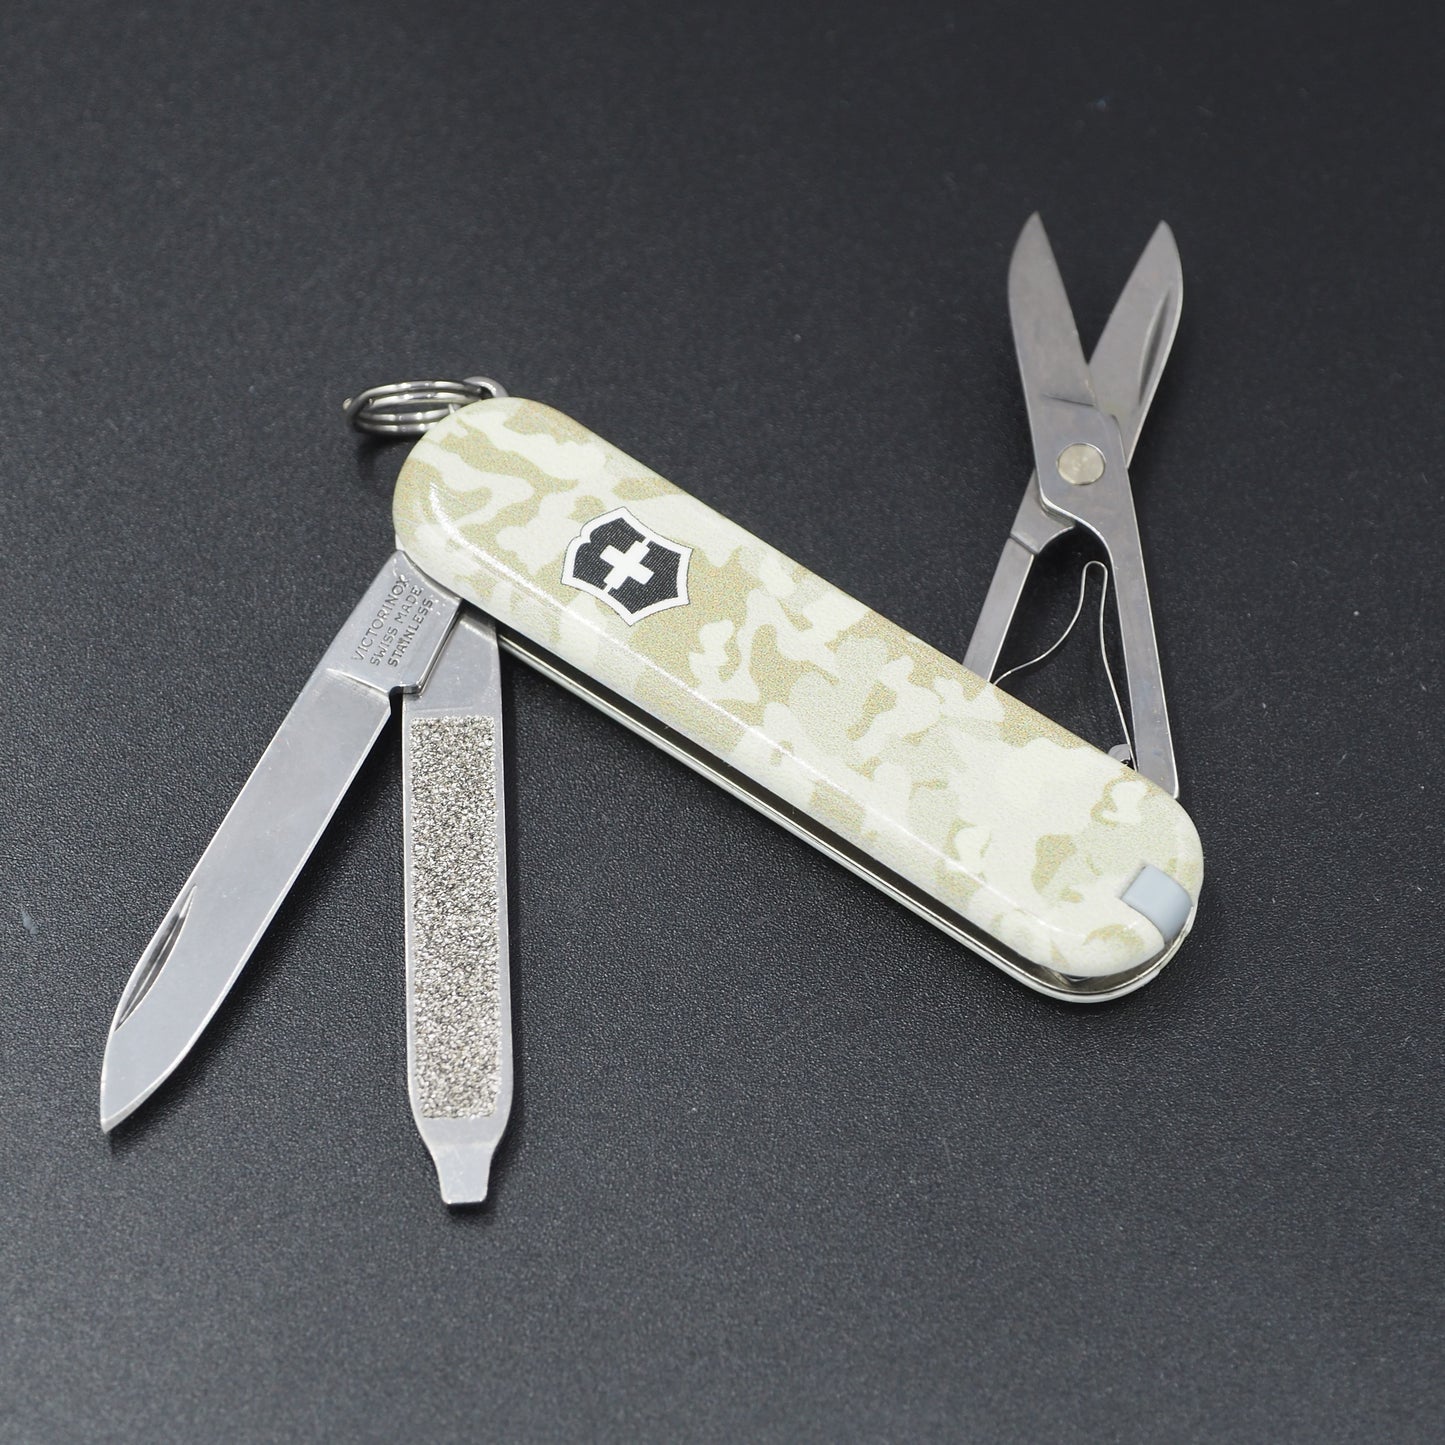 Victorinox WWP Classic (Wounded Warrior Project)